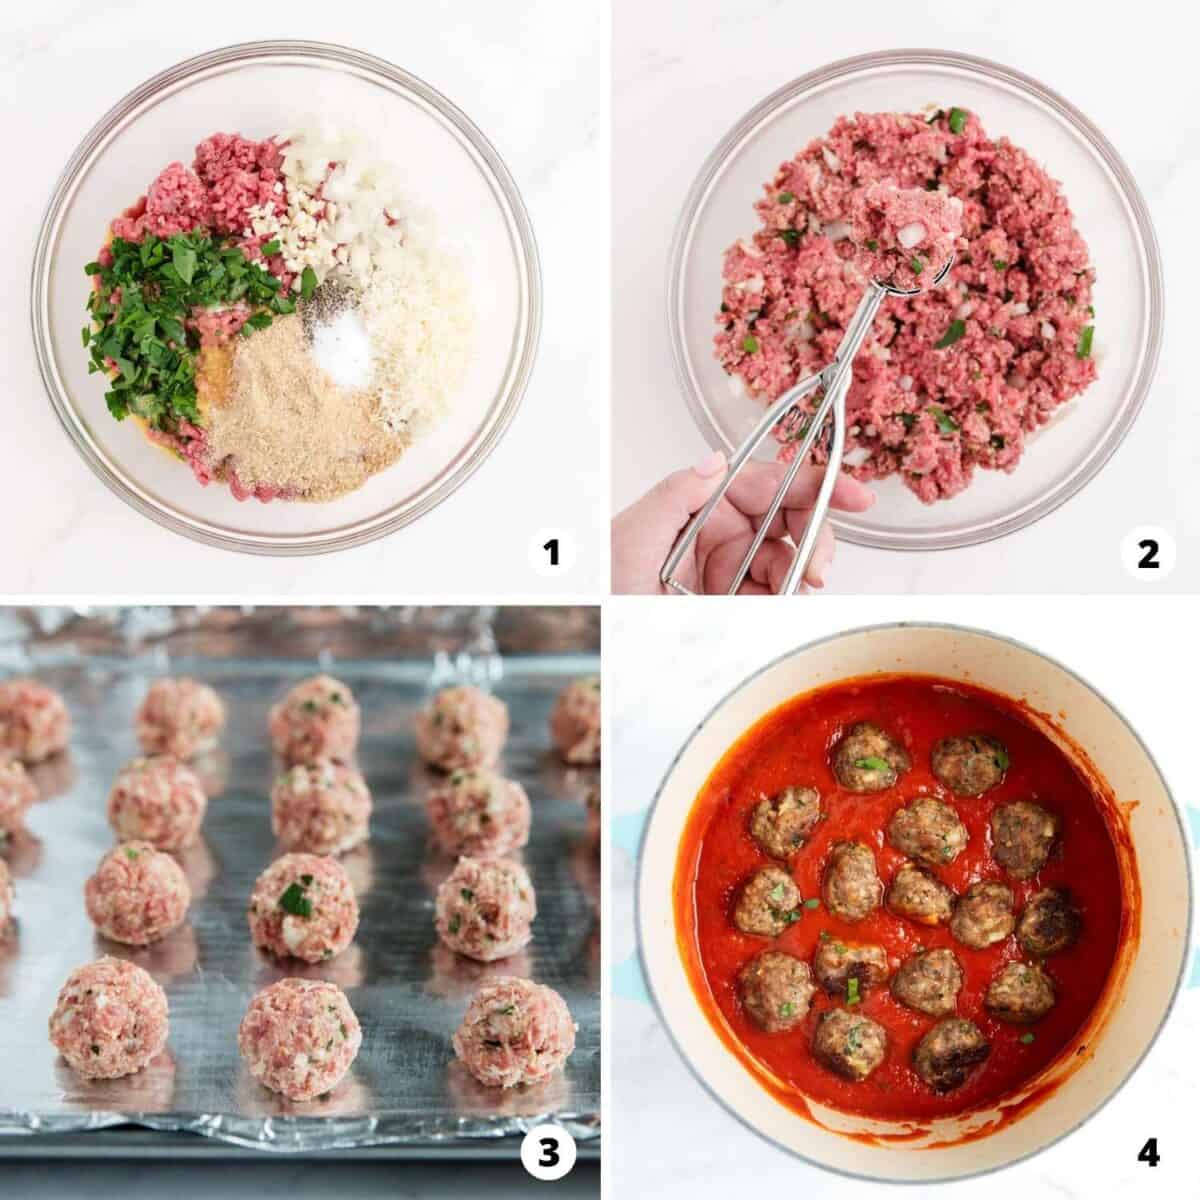 The process of making homemade meatballs in a 4 step collage.